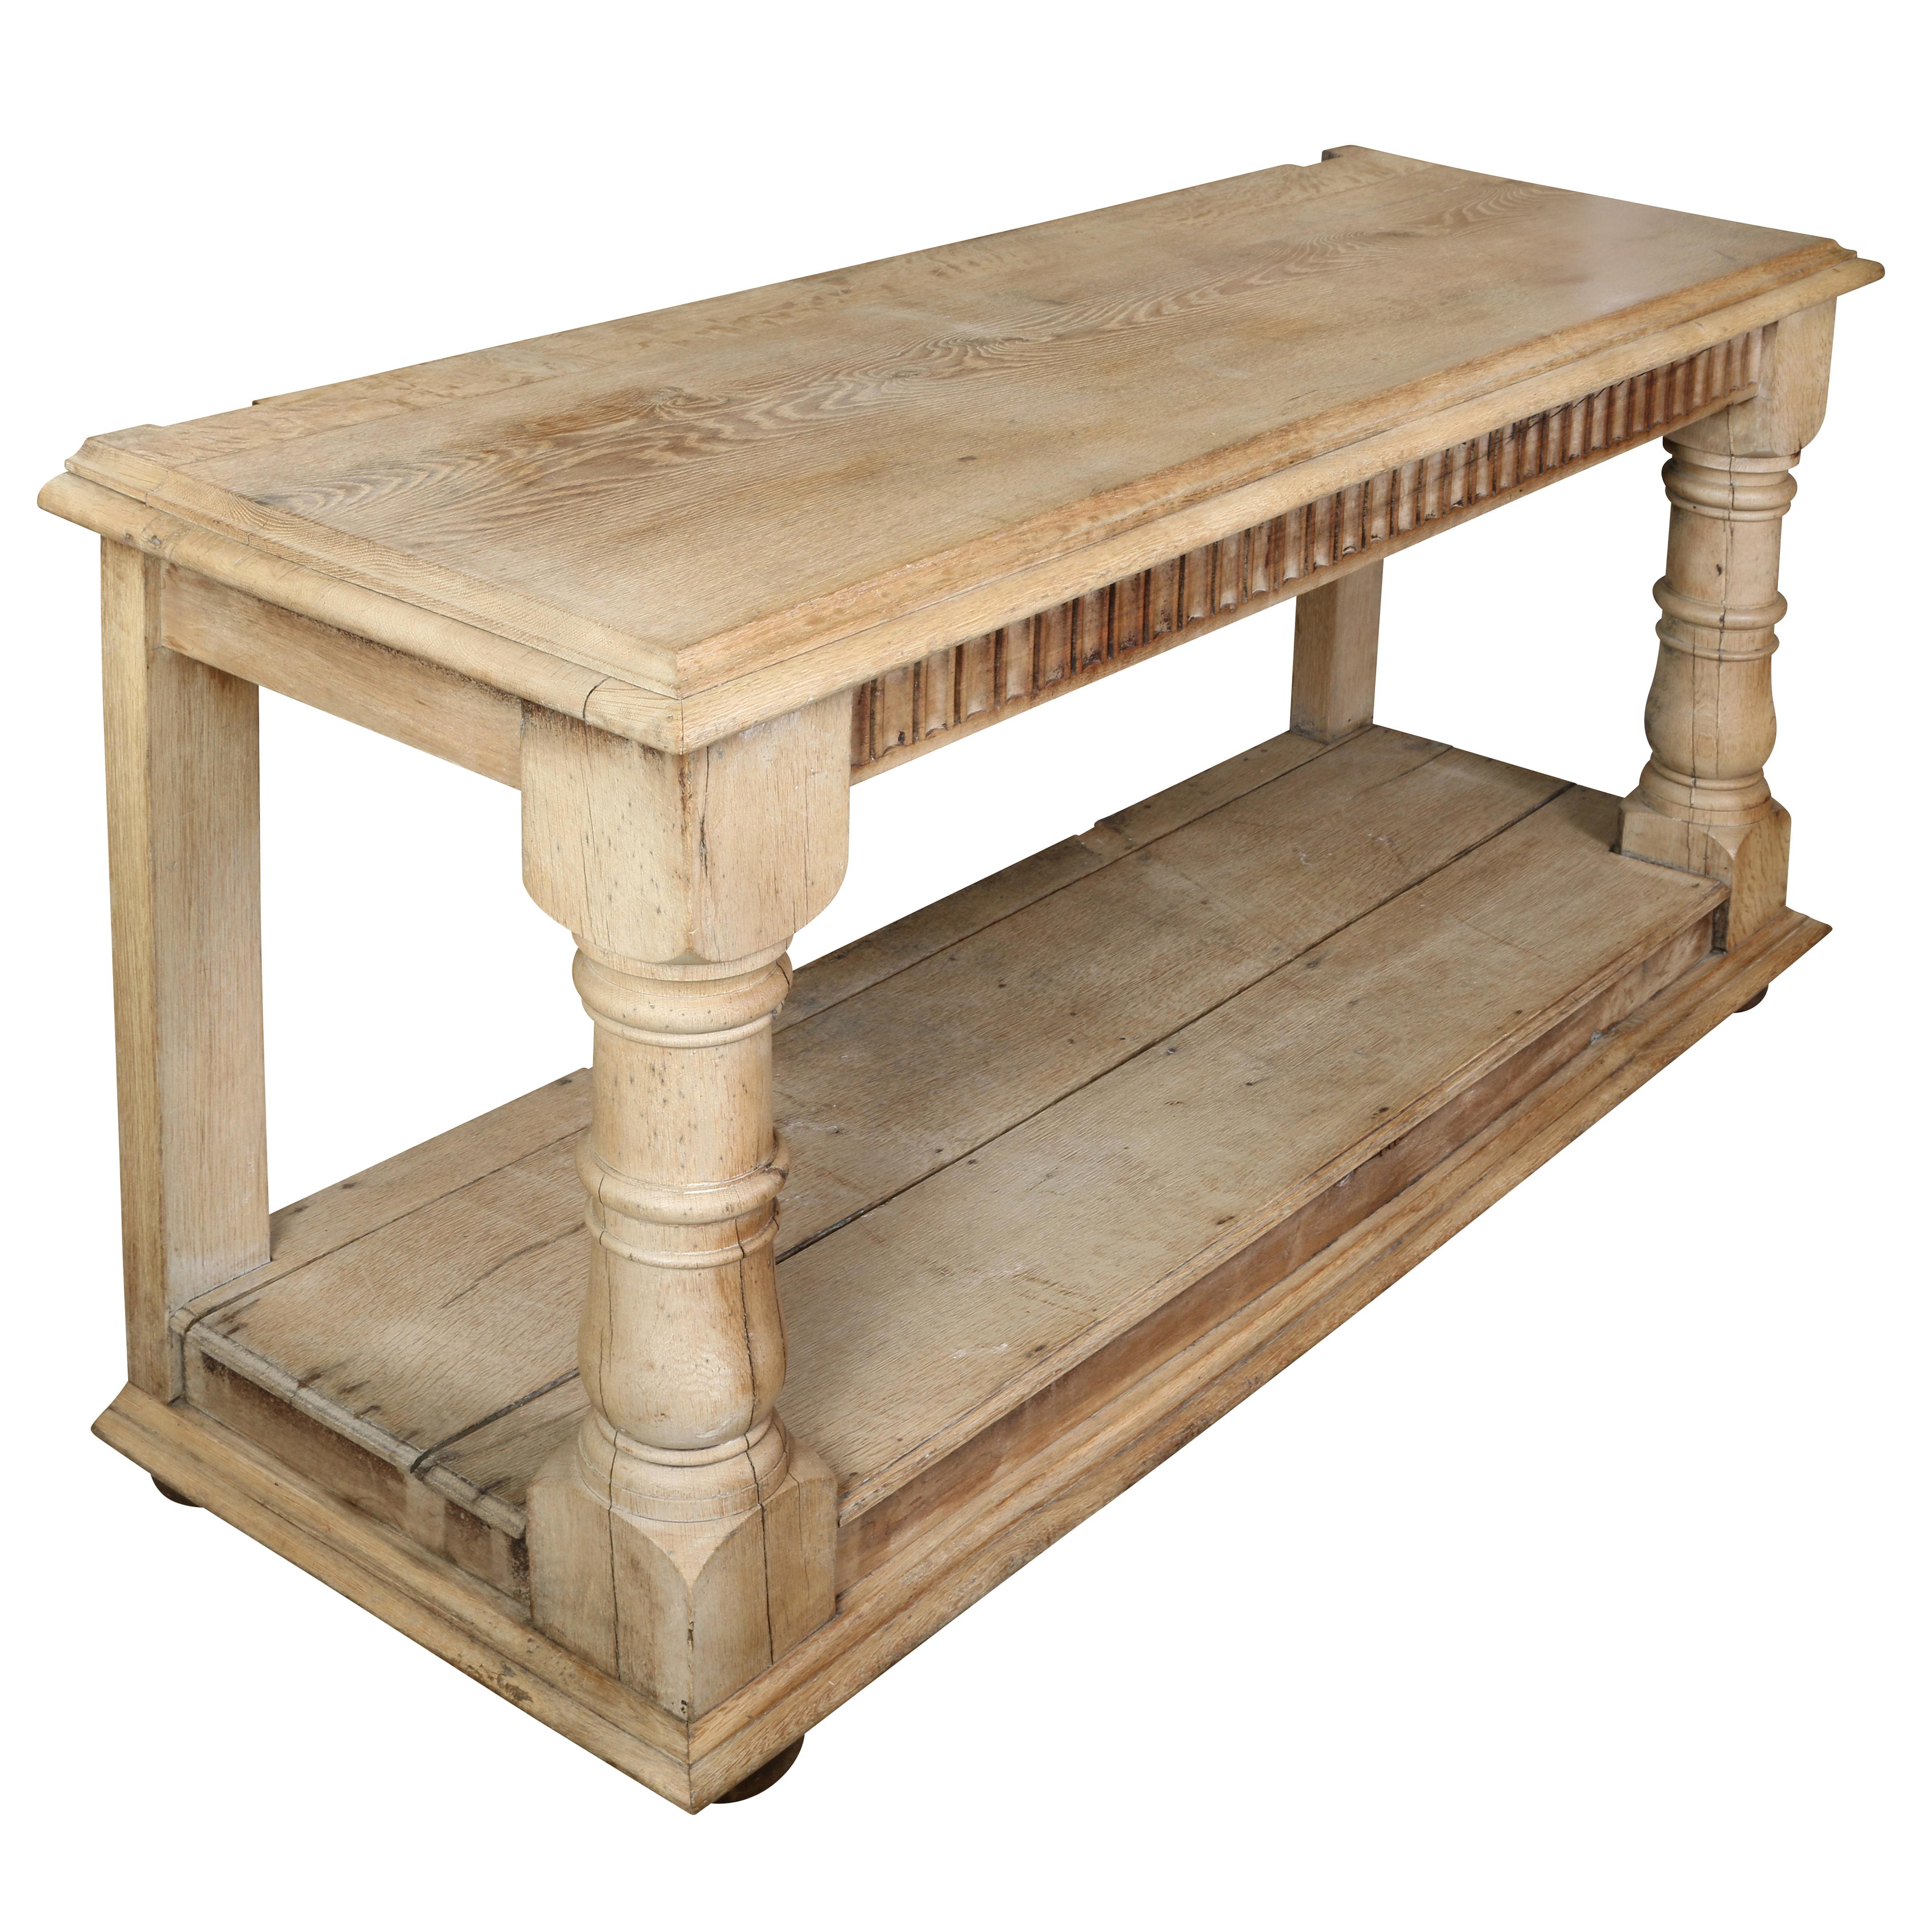 A great looking bleached oak console with a lower shelf. A 